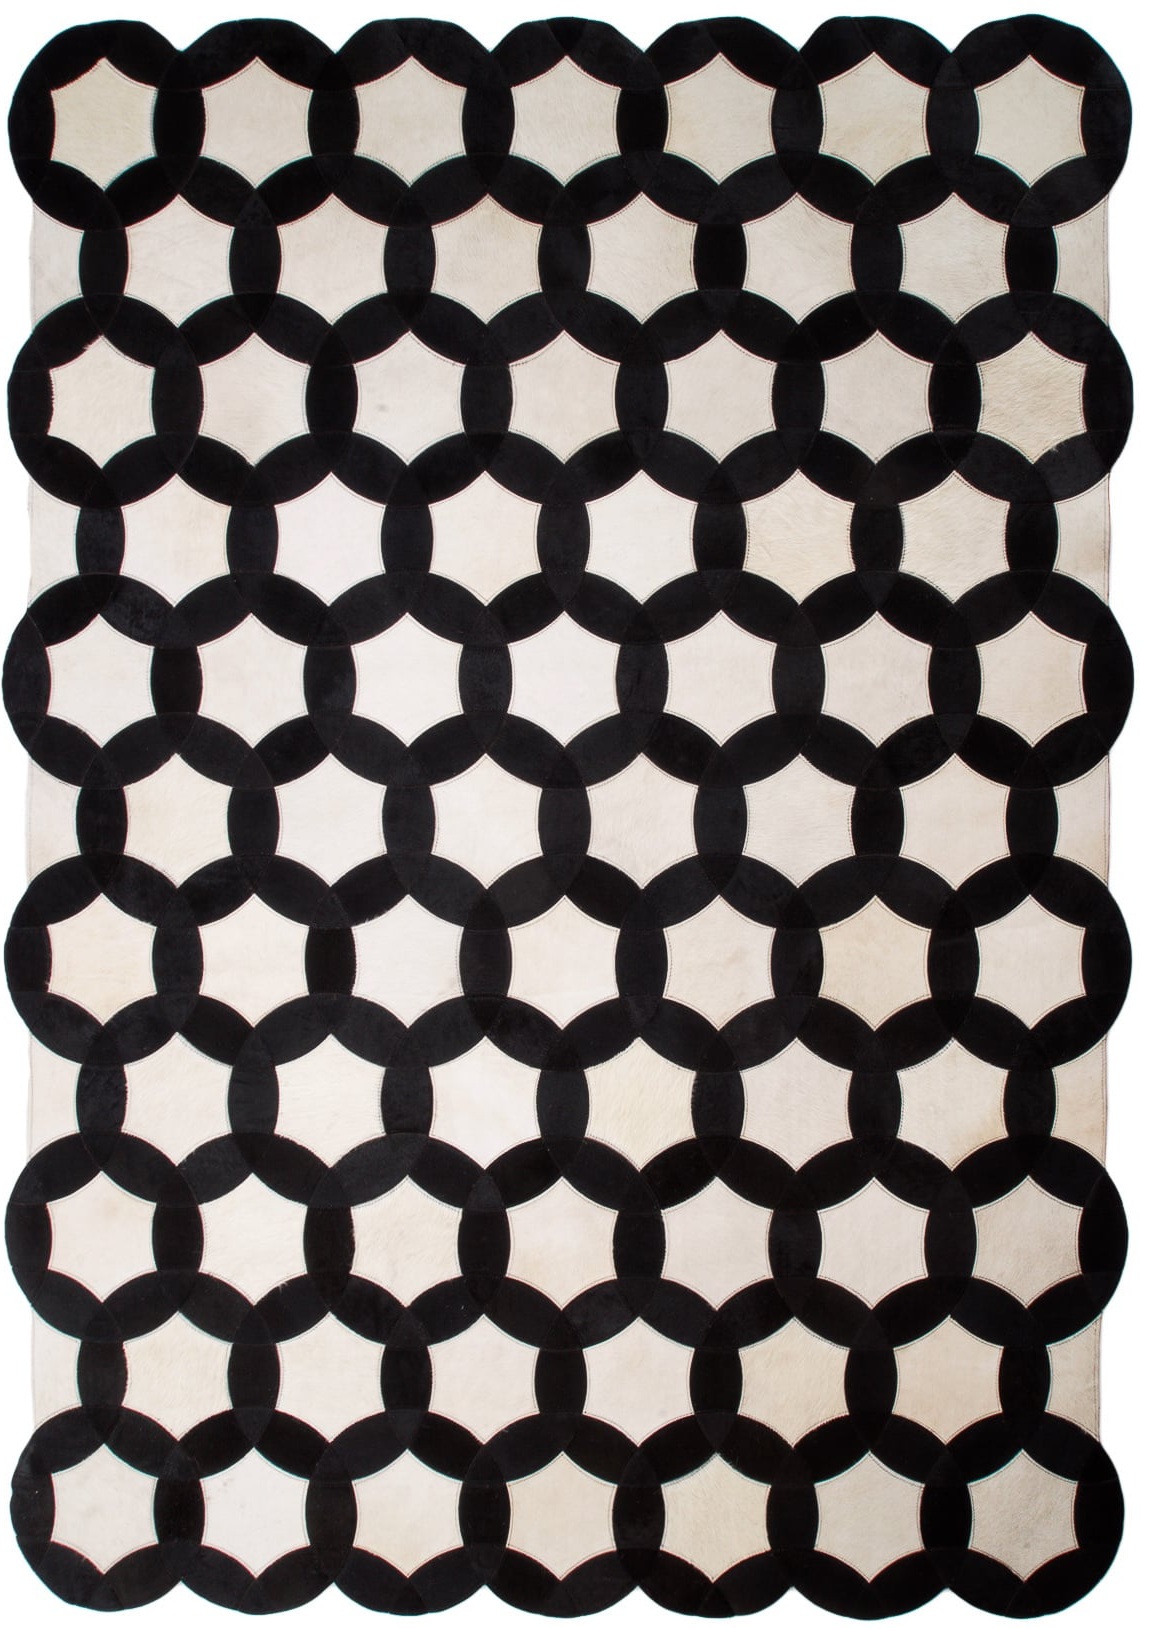 Monochrome Black and White Circle Hide Rug - black and white rug by The Cinnamon Room